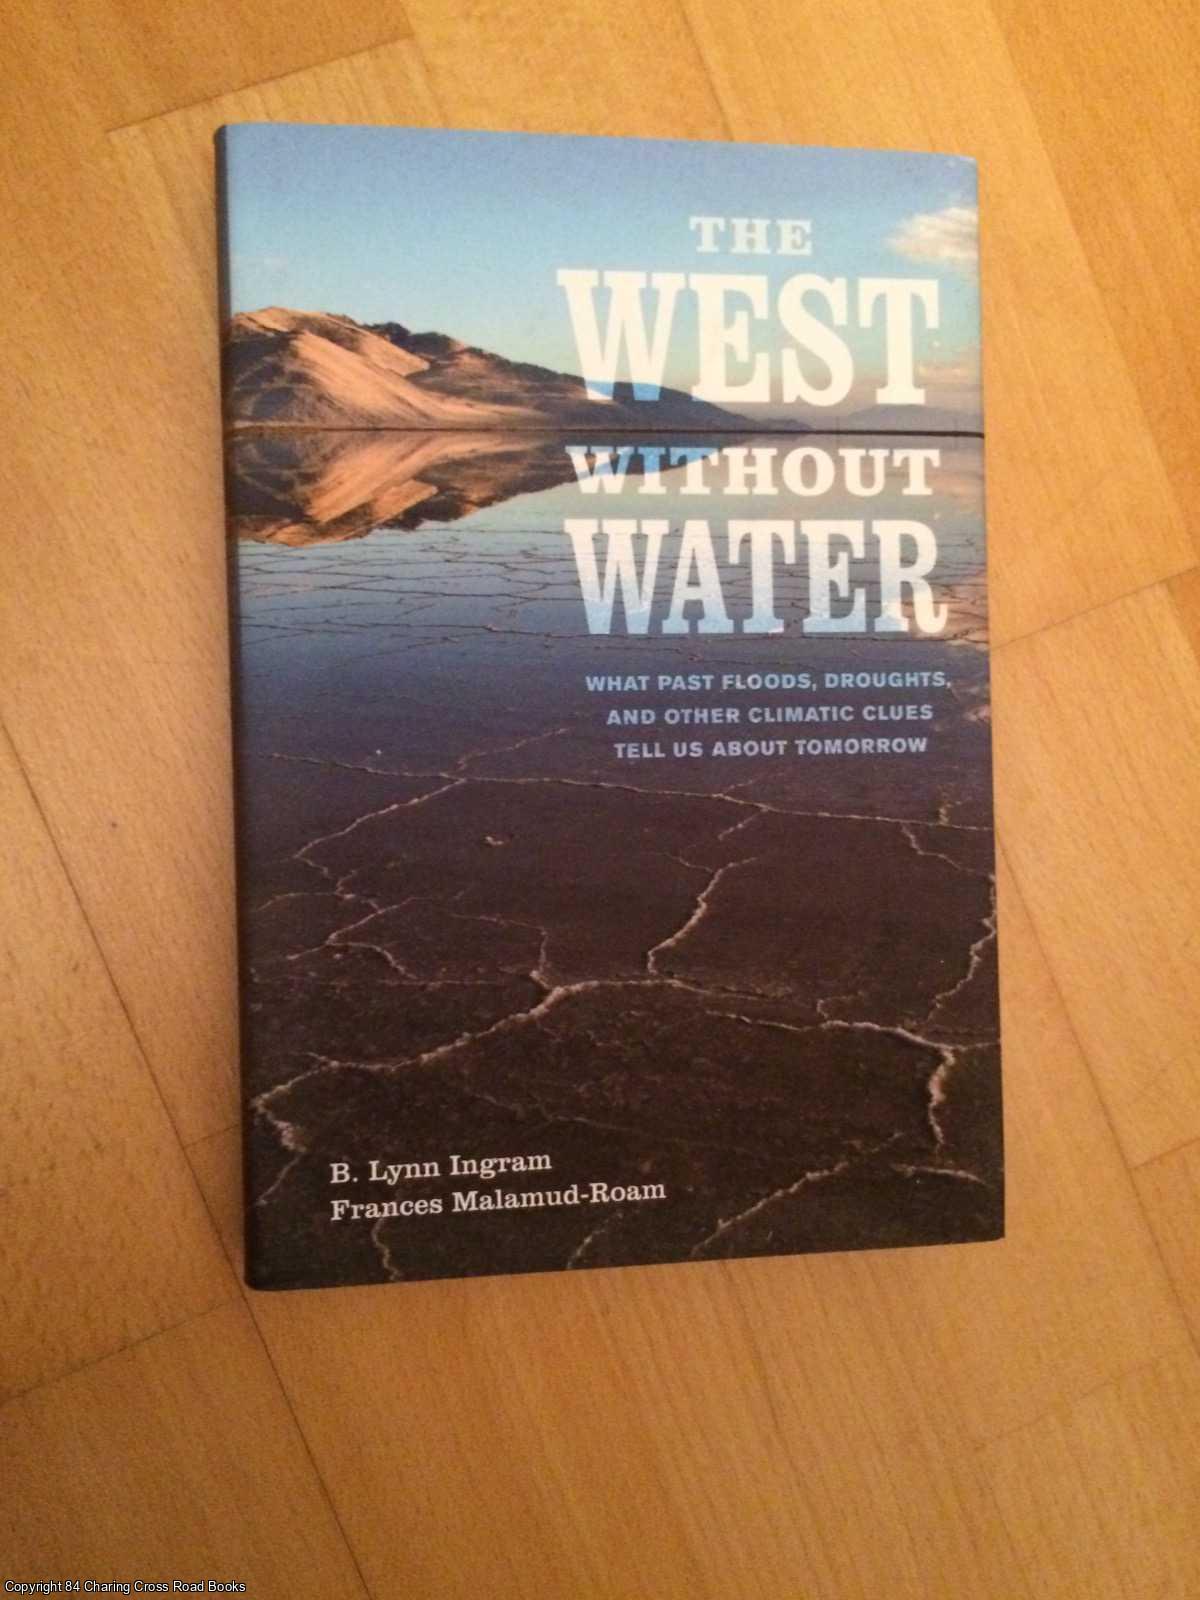 Malamud-roam, Frances, Ingram, Lynn - The West without Water: What Past Floods, Droughts, and Other Climatic Clues Tell Us About Tomorrow